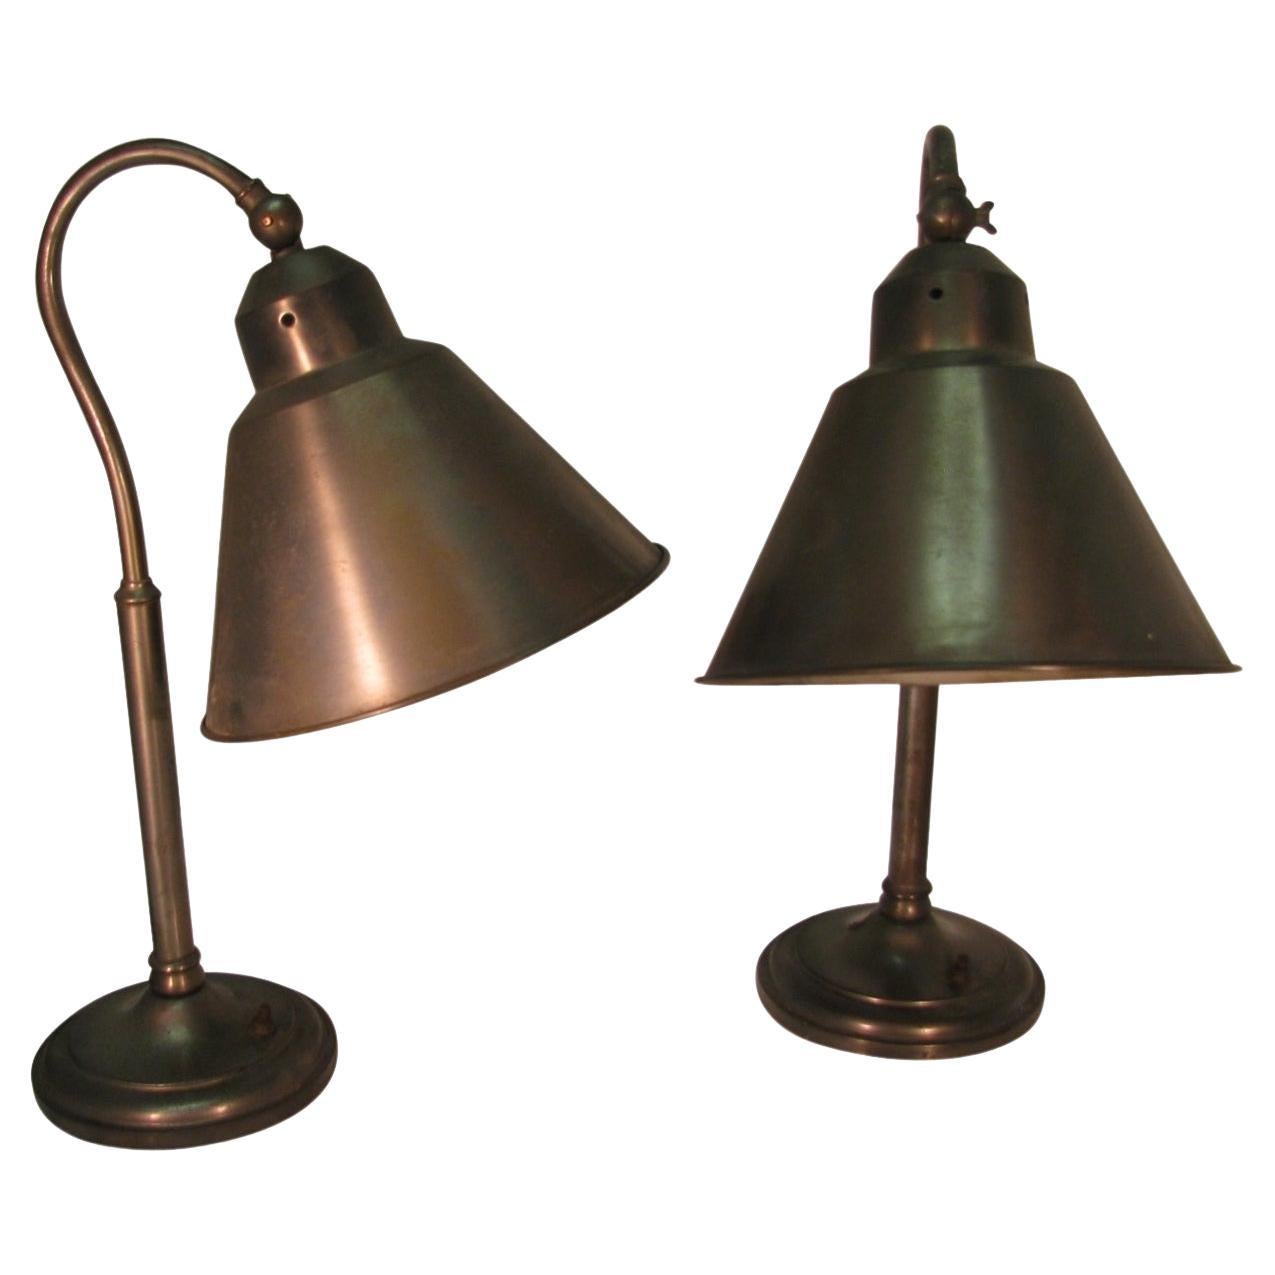 Bauhaus Pair of Mid-Century Modern Steel Desk Table Lamps For Sale